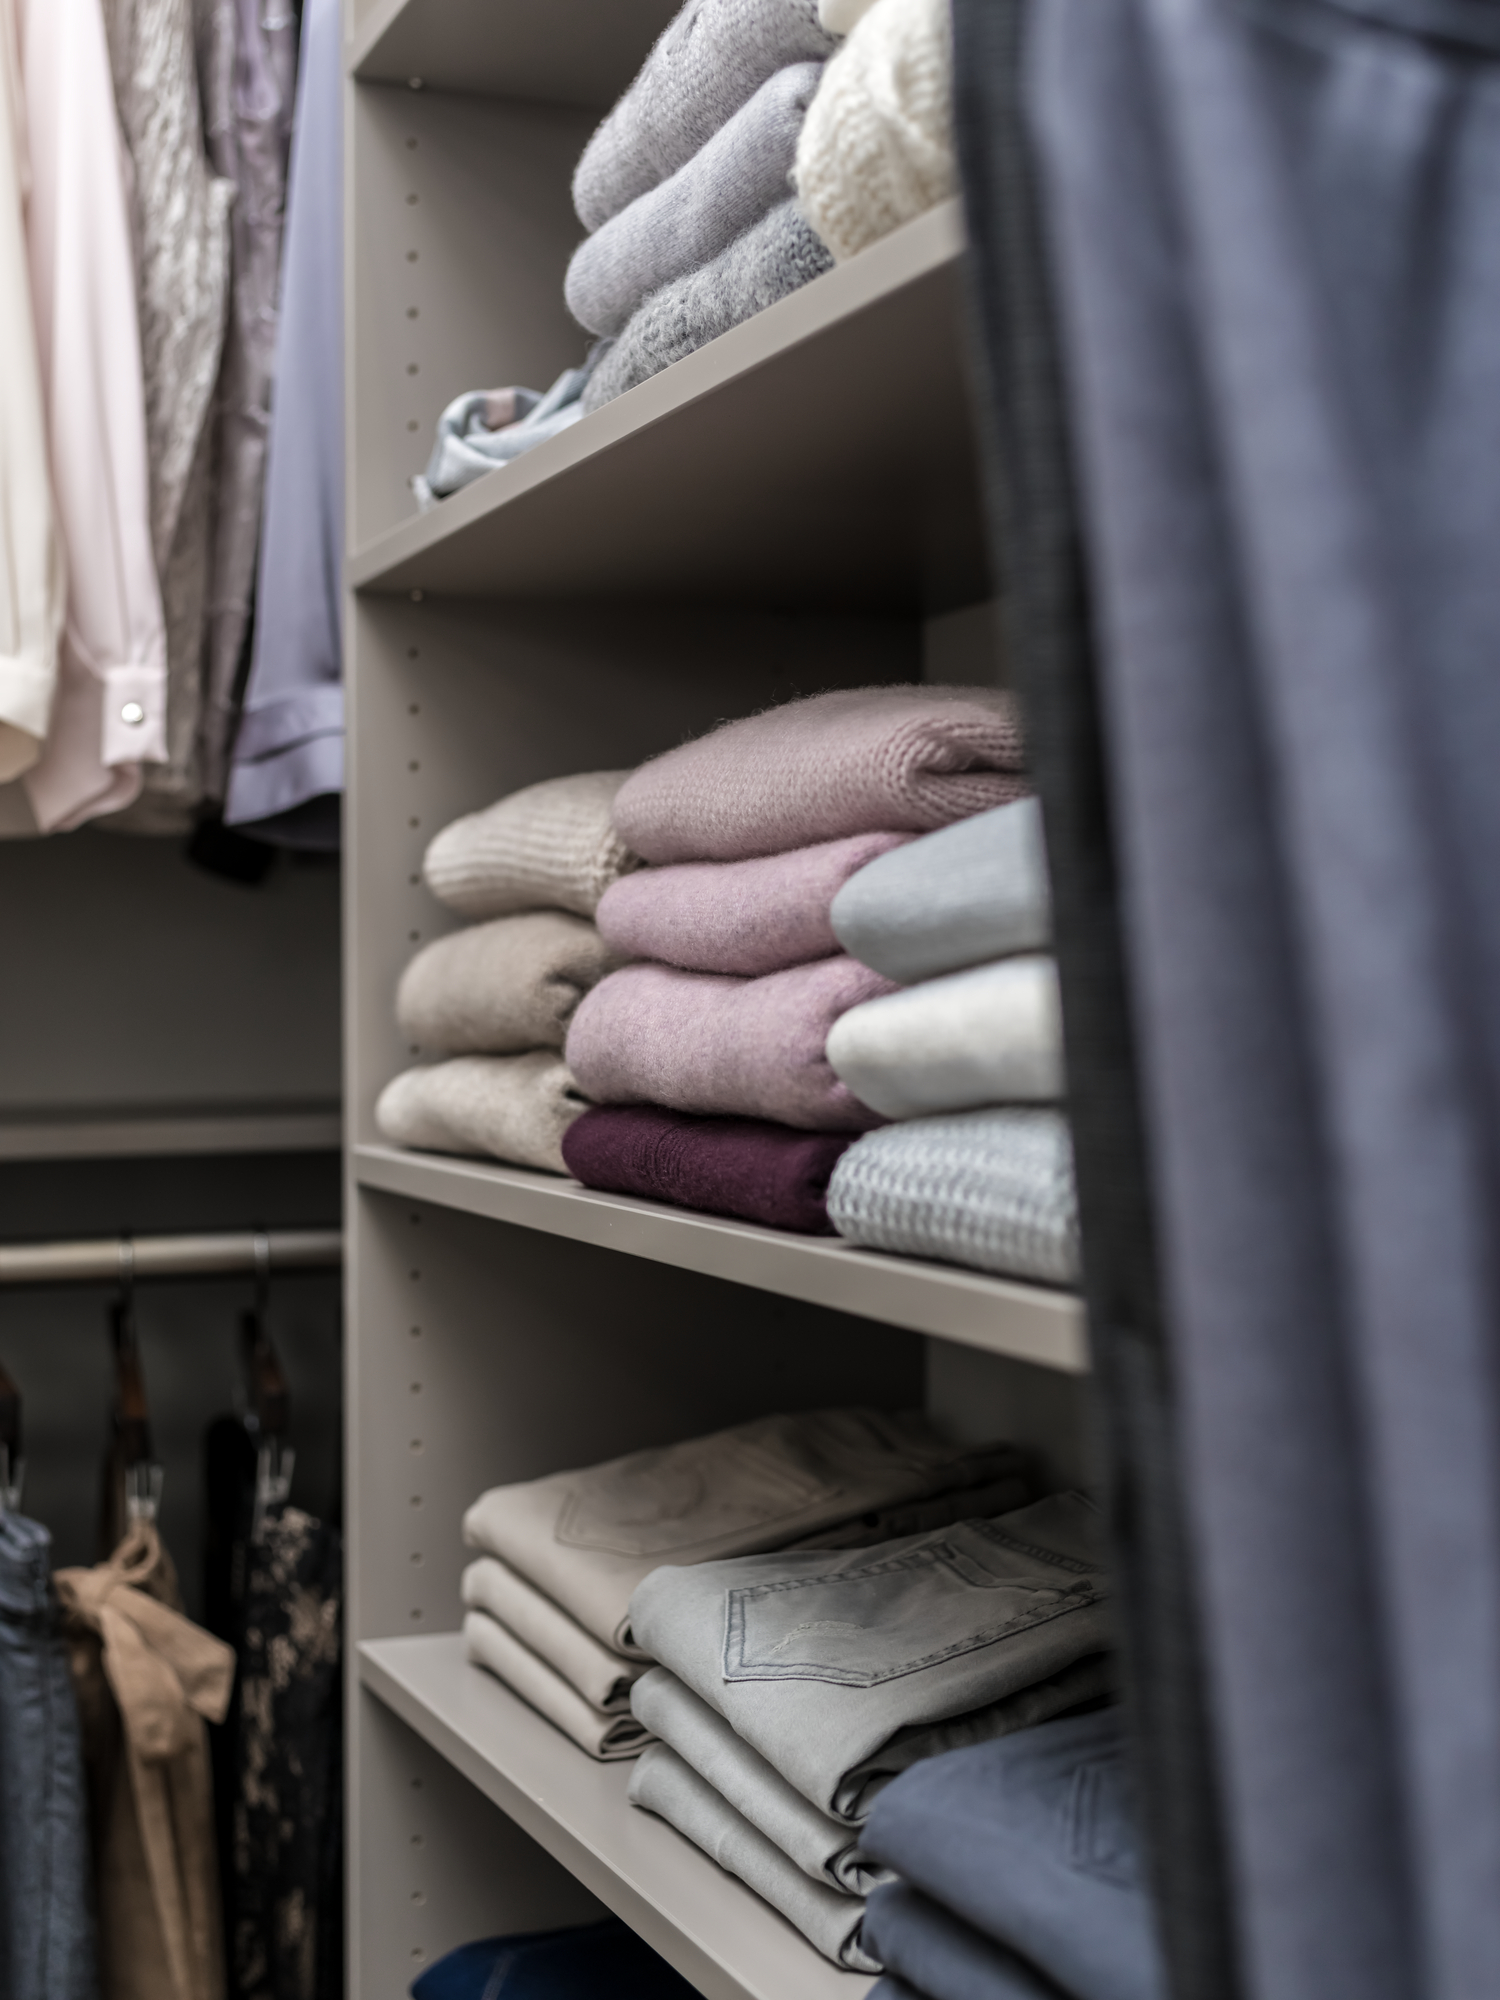 Custom storage shelving for a closet for all your sweaters and pants from Inspired Closets